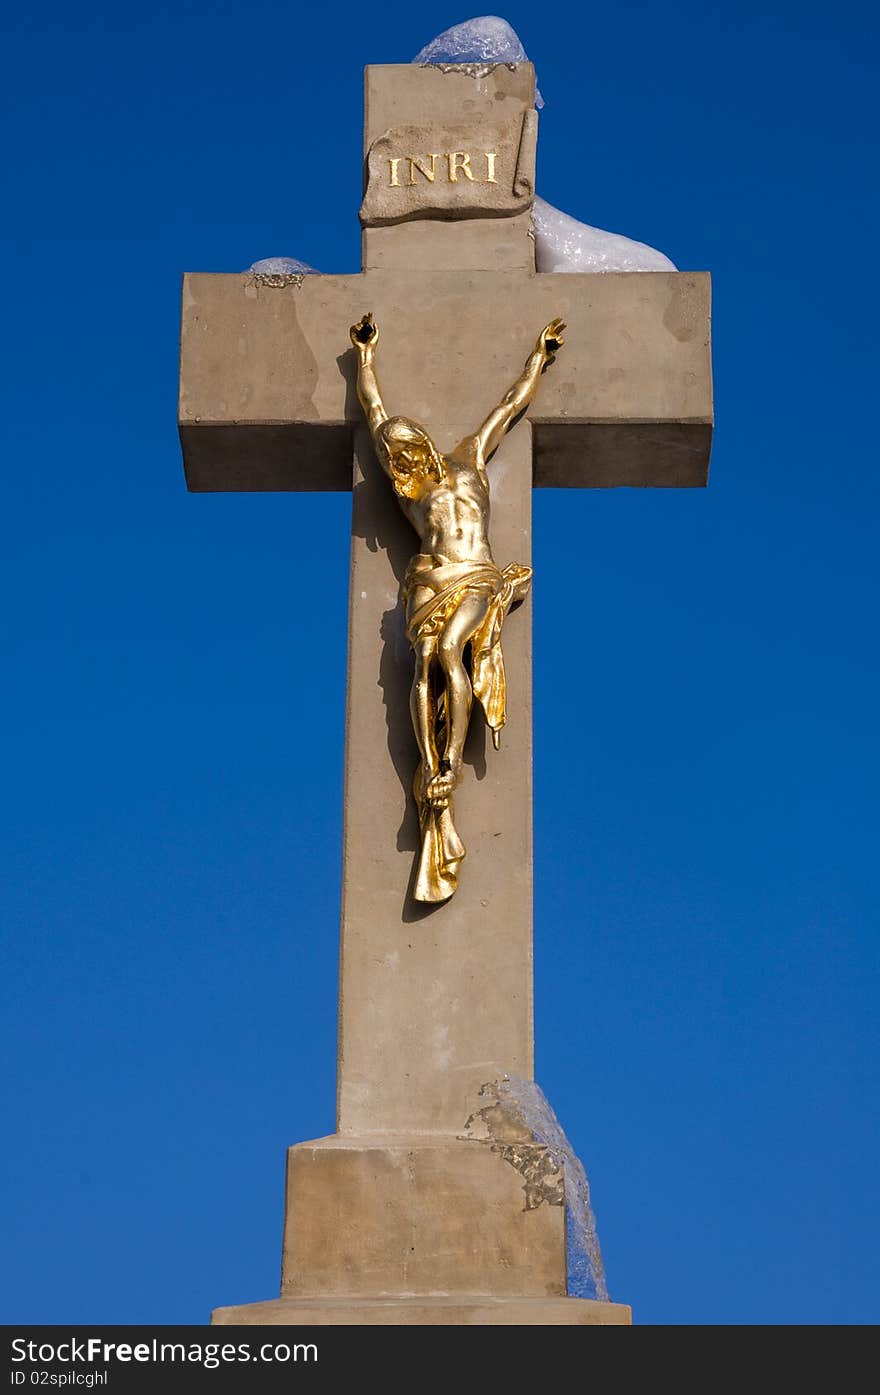 Golden statue of Jesus on a stone cross with a melting snow against a blue sky. Golden statue of Jesus on a stone cross with a melting snow against a blue sky.